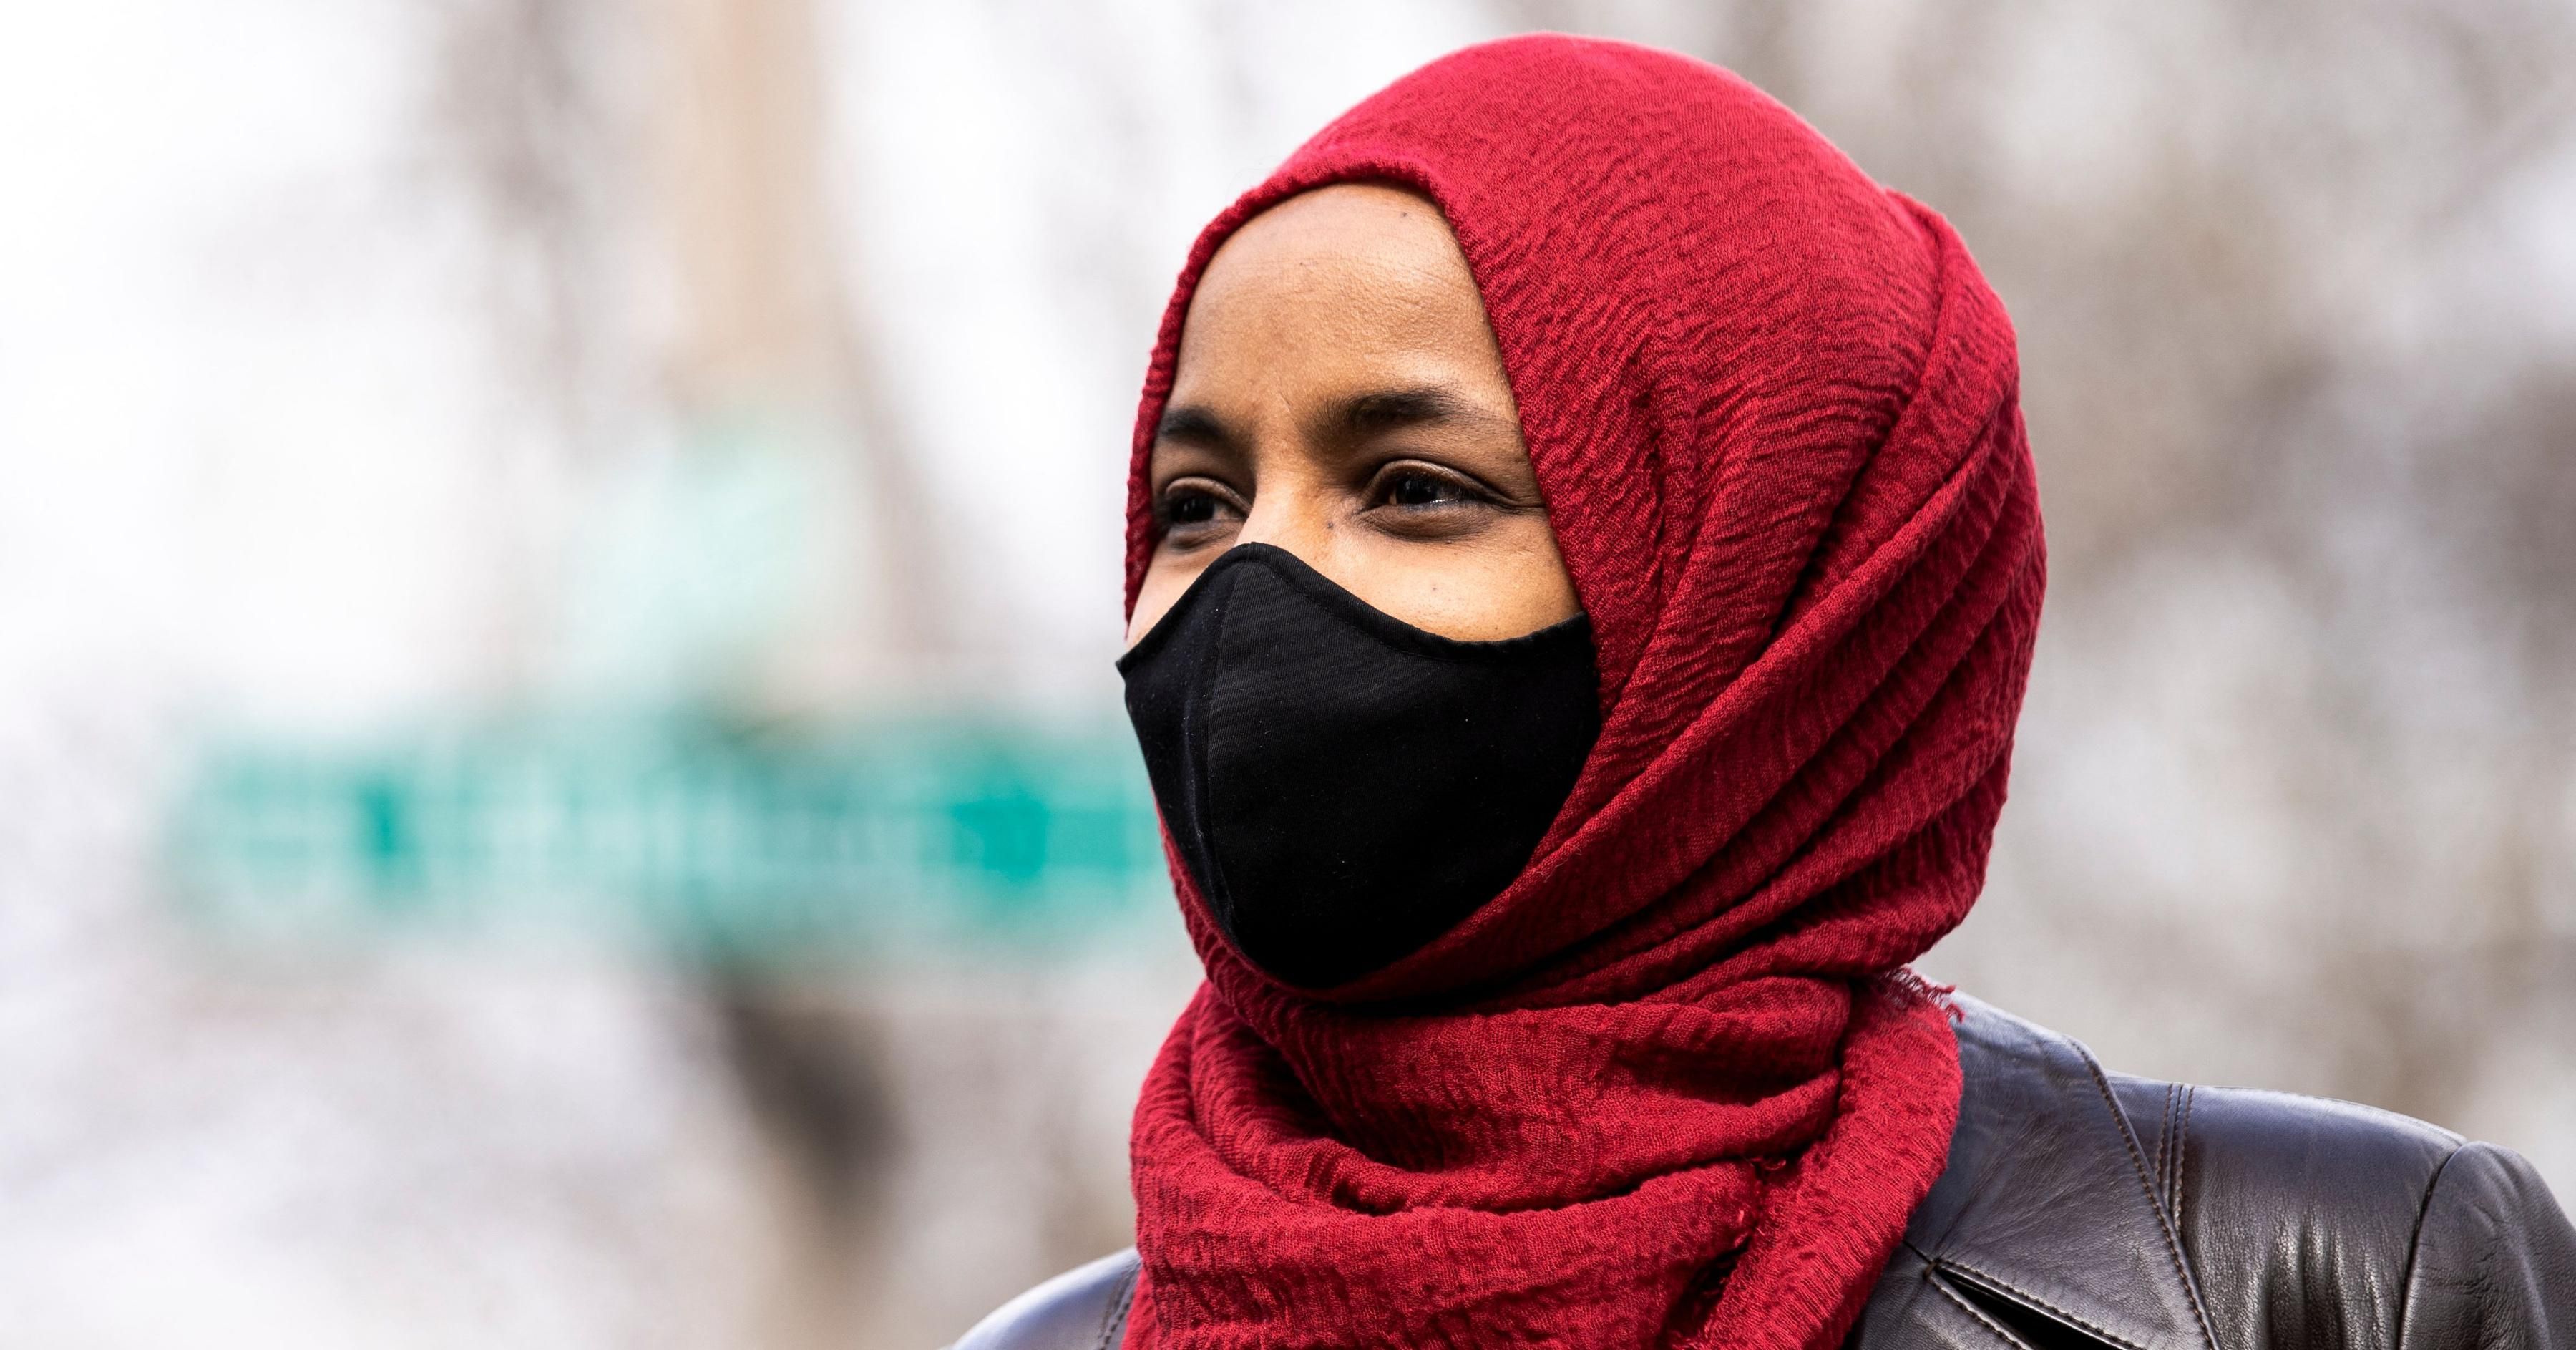 Rep. Ilhan Omar (D-MN) looks on during a press conference at a memorial site for Daunte Wright in Brooklyn Center, Minnesota on April 20, 2021. (Photo: KEREM YUCEL/AFP via Getty Images)